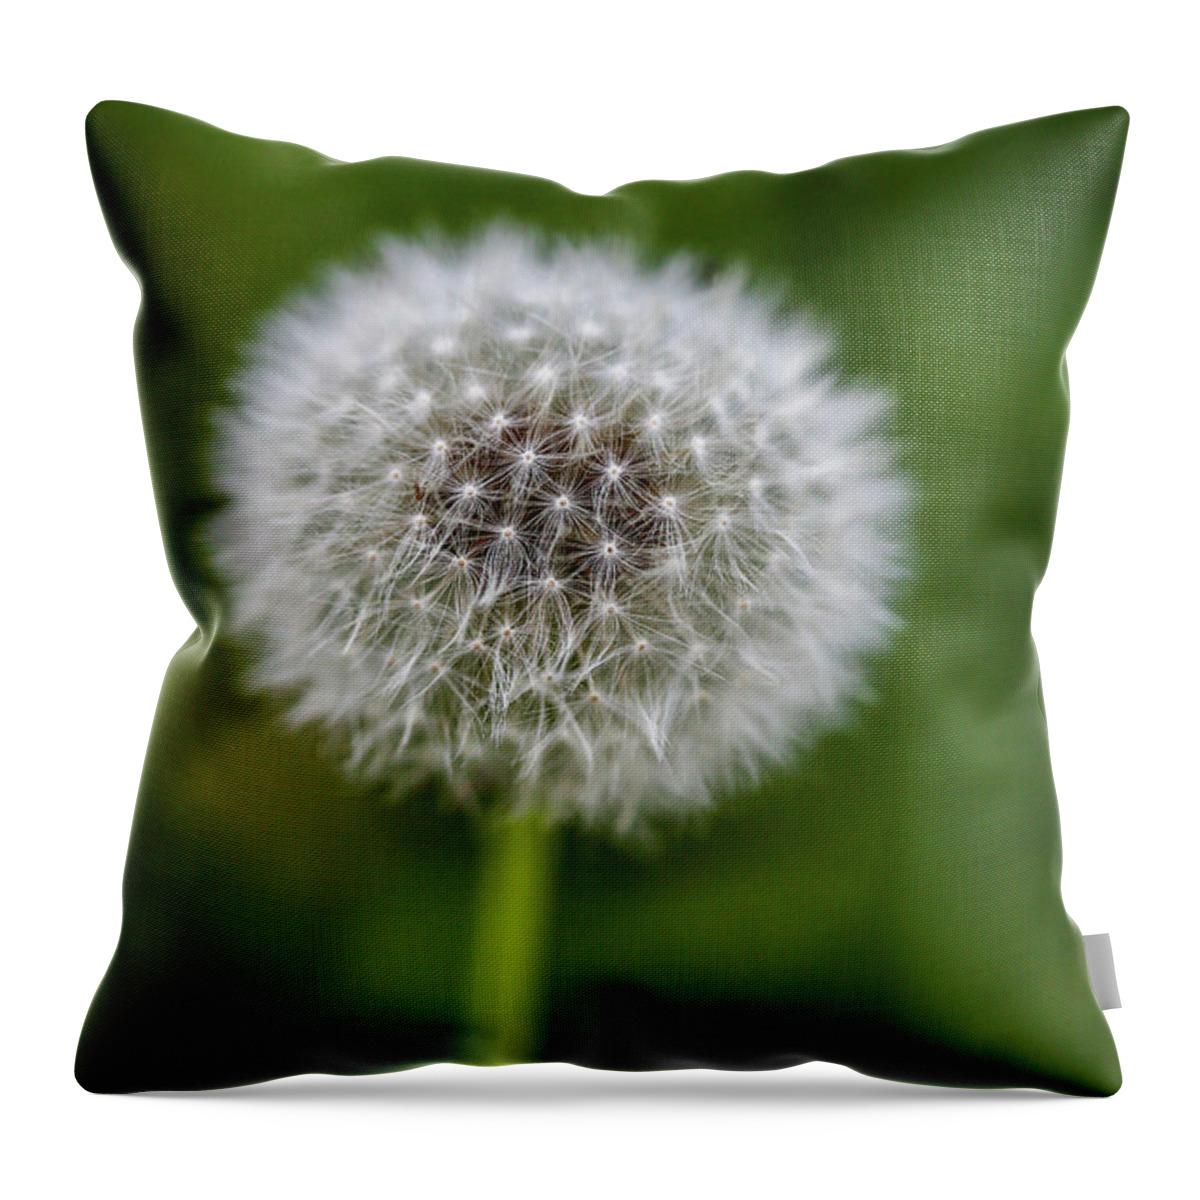 Copyright Elixir Images Throw Pillow featuring the photograph Dandelion Puff by Santa Fe